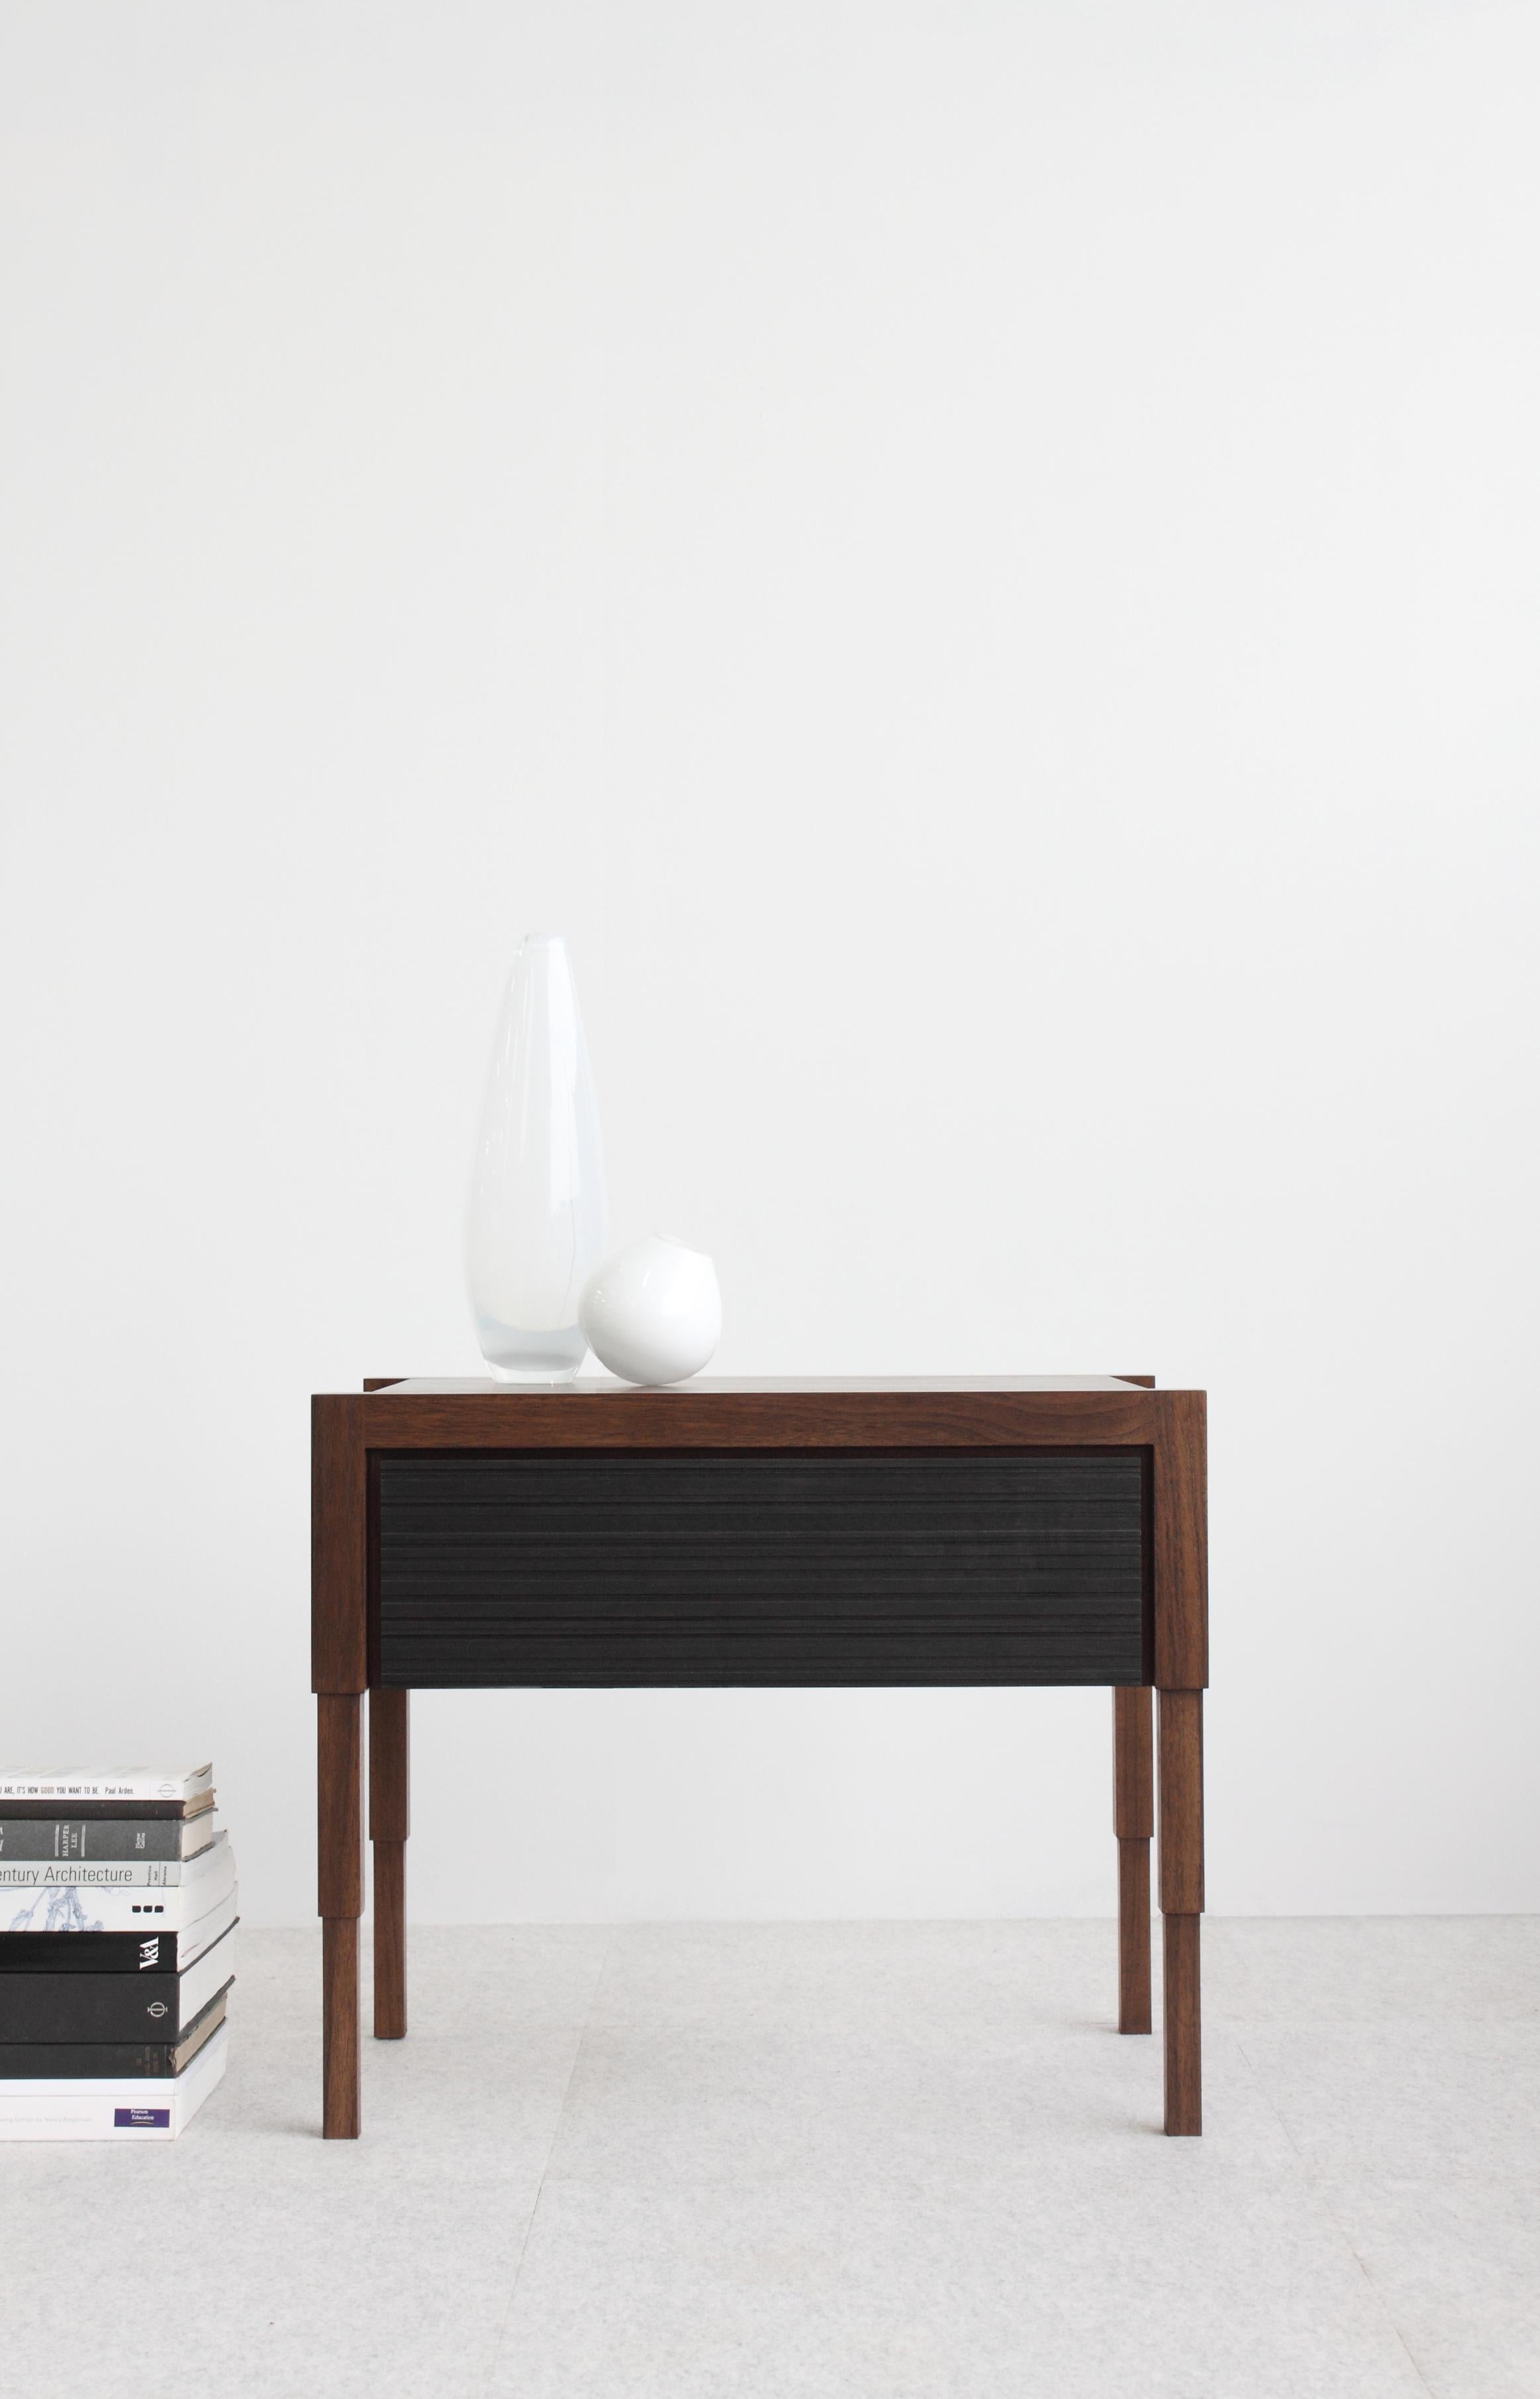 Careful consideration to detail is the acme to the design of this architecturally inspired side table or nightstand. Each table is fabricated by hand and available to order in 8 solid or combination traditional wood finish options.  
Design features